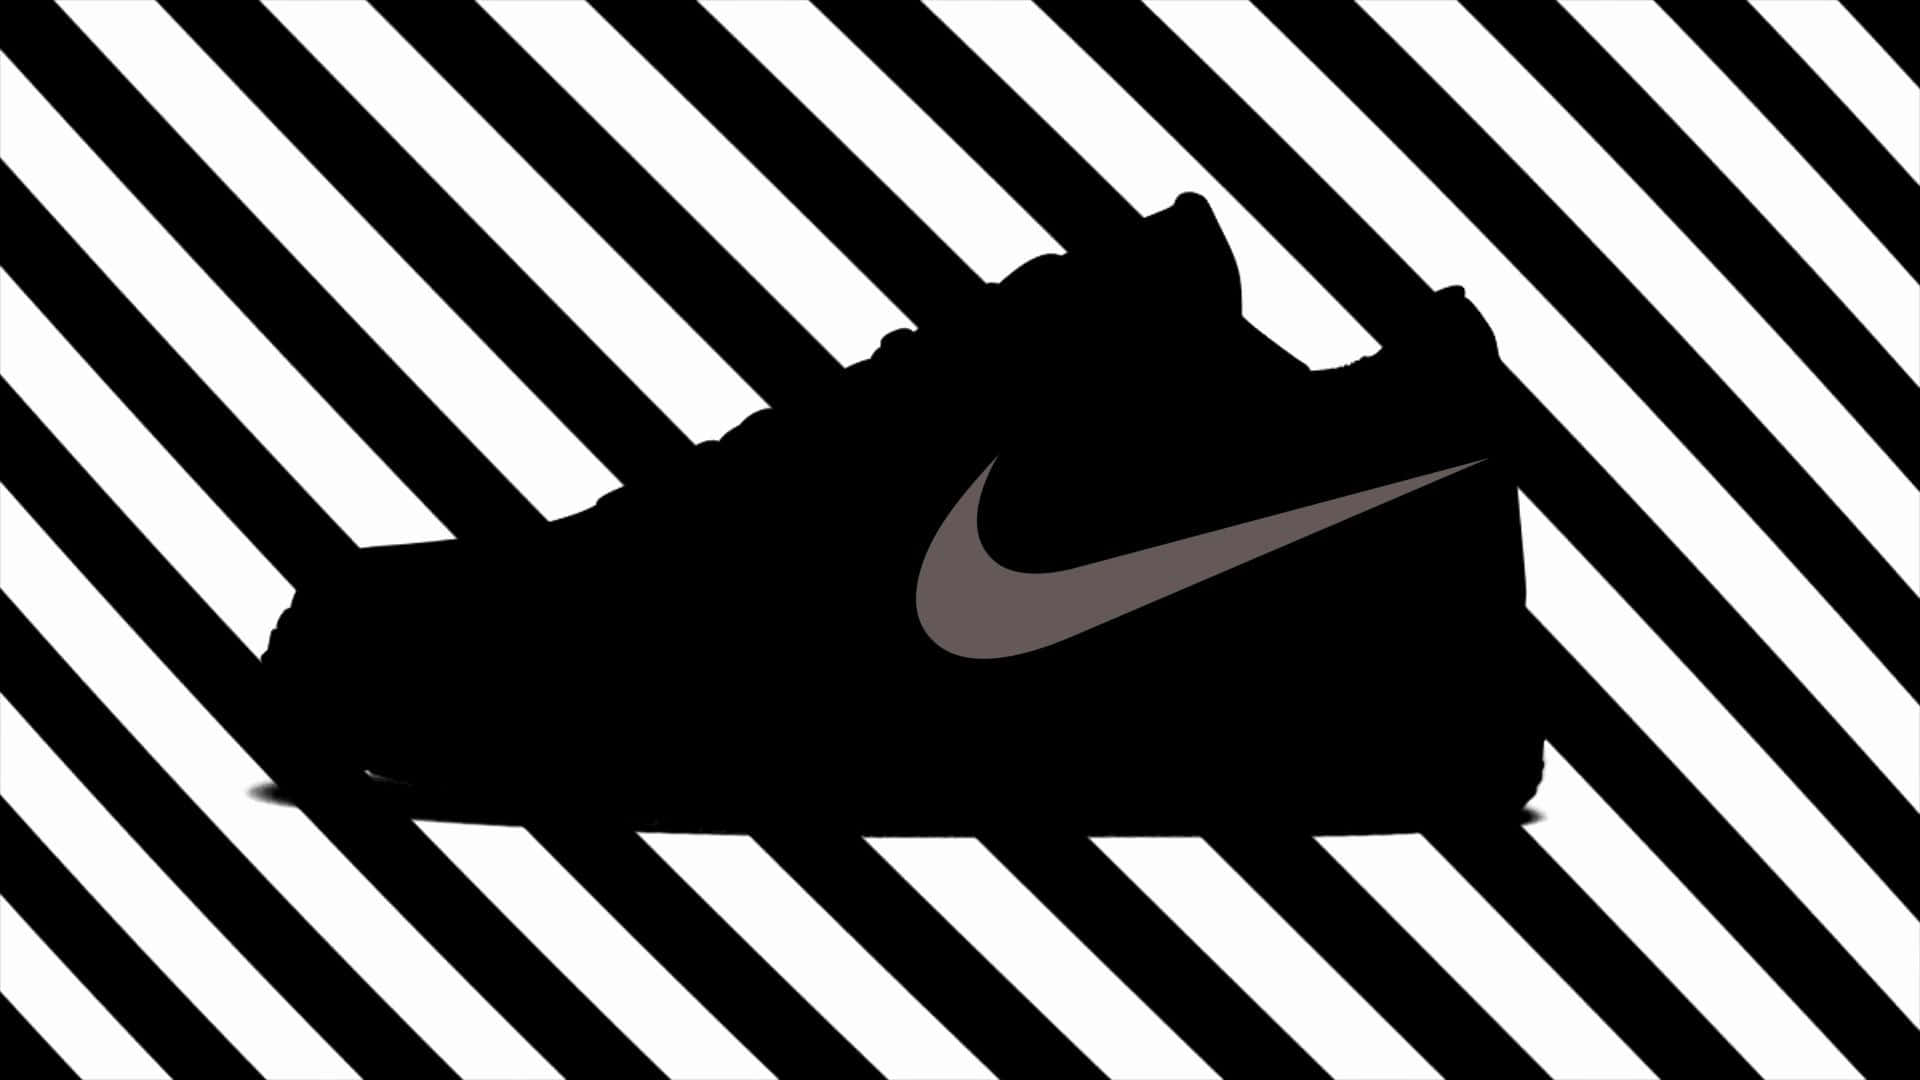 Nike Air Force 1 Silhouette On A Black And White Striped Background Wallpaper